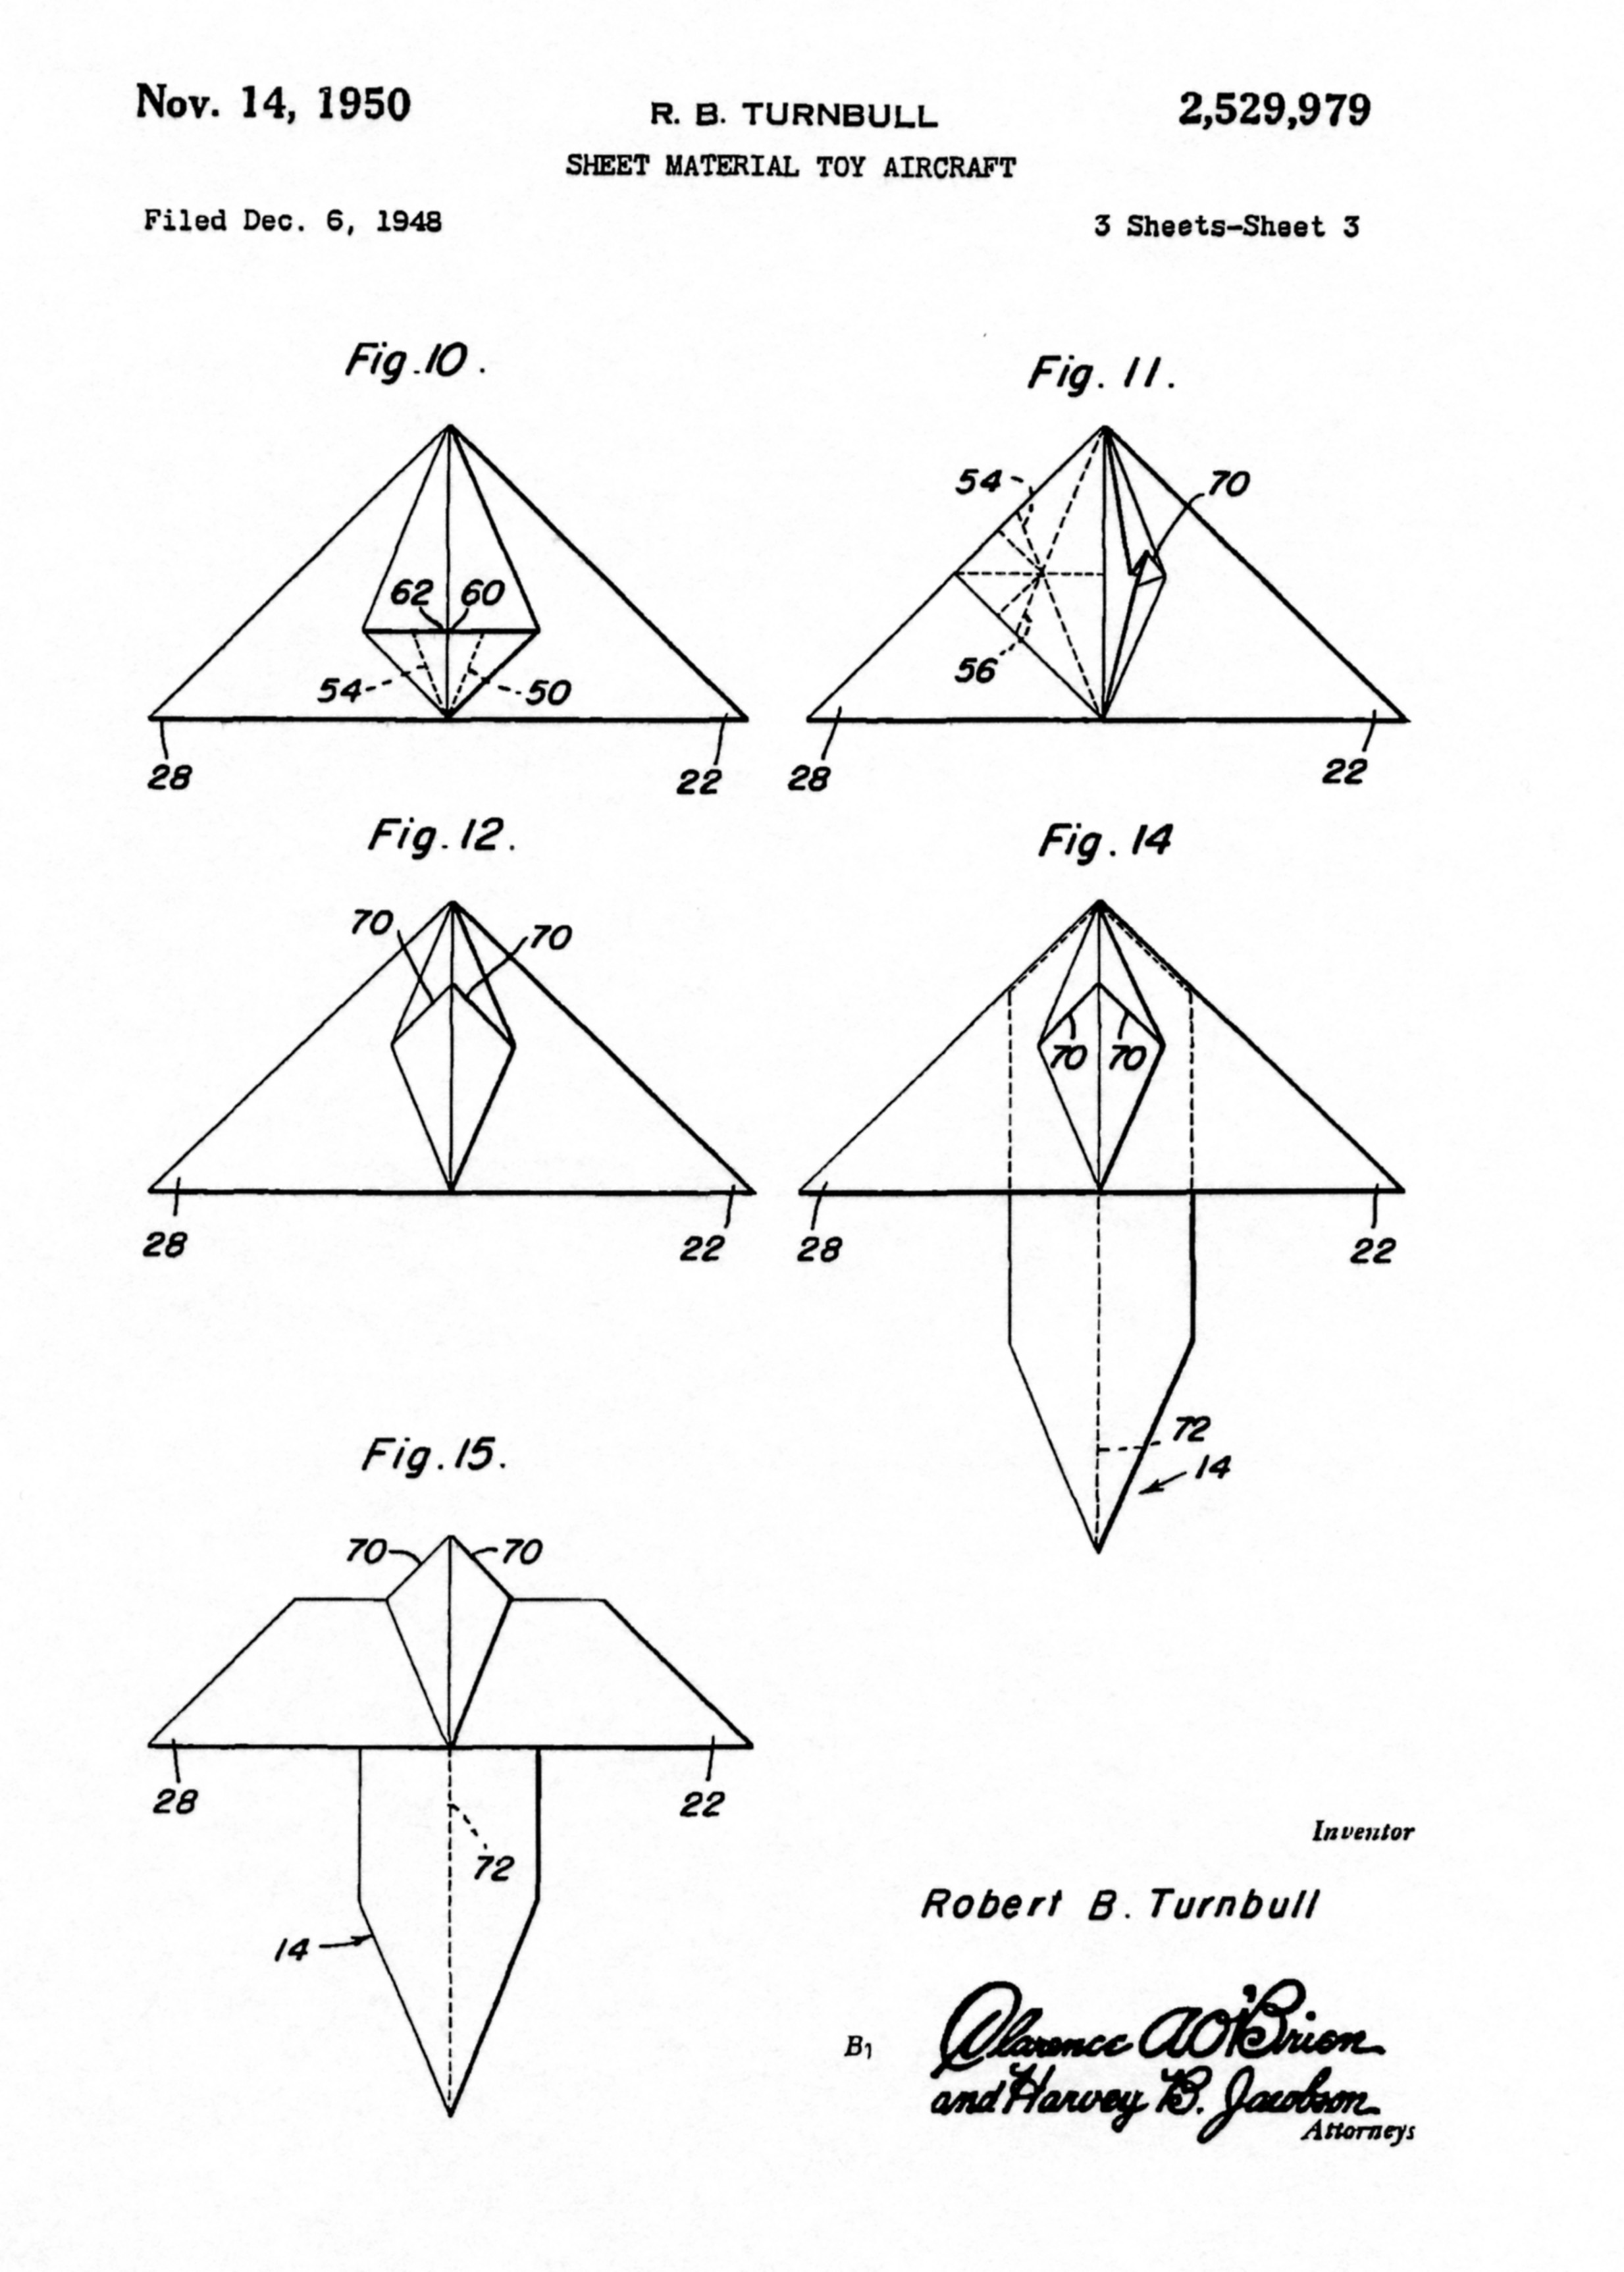 Patent for Turnbull Sheet Metal Toy Airplane page 3